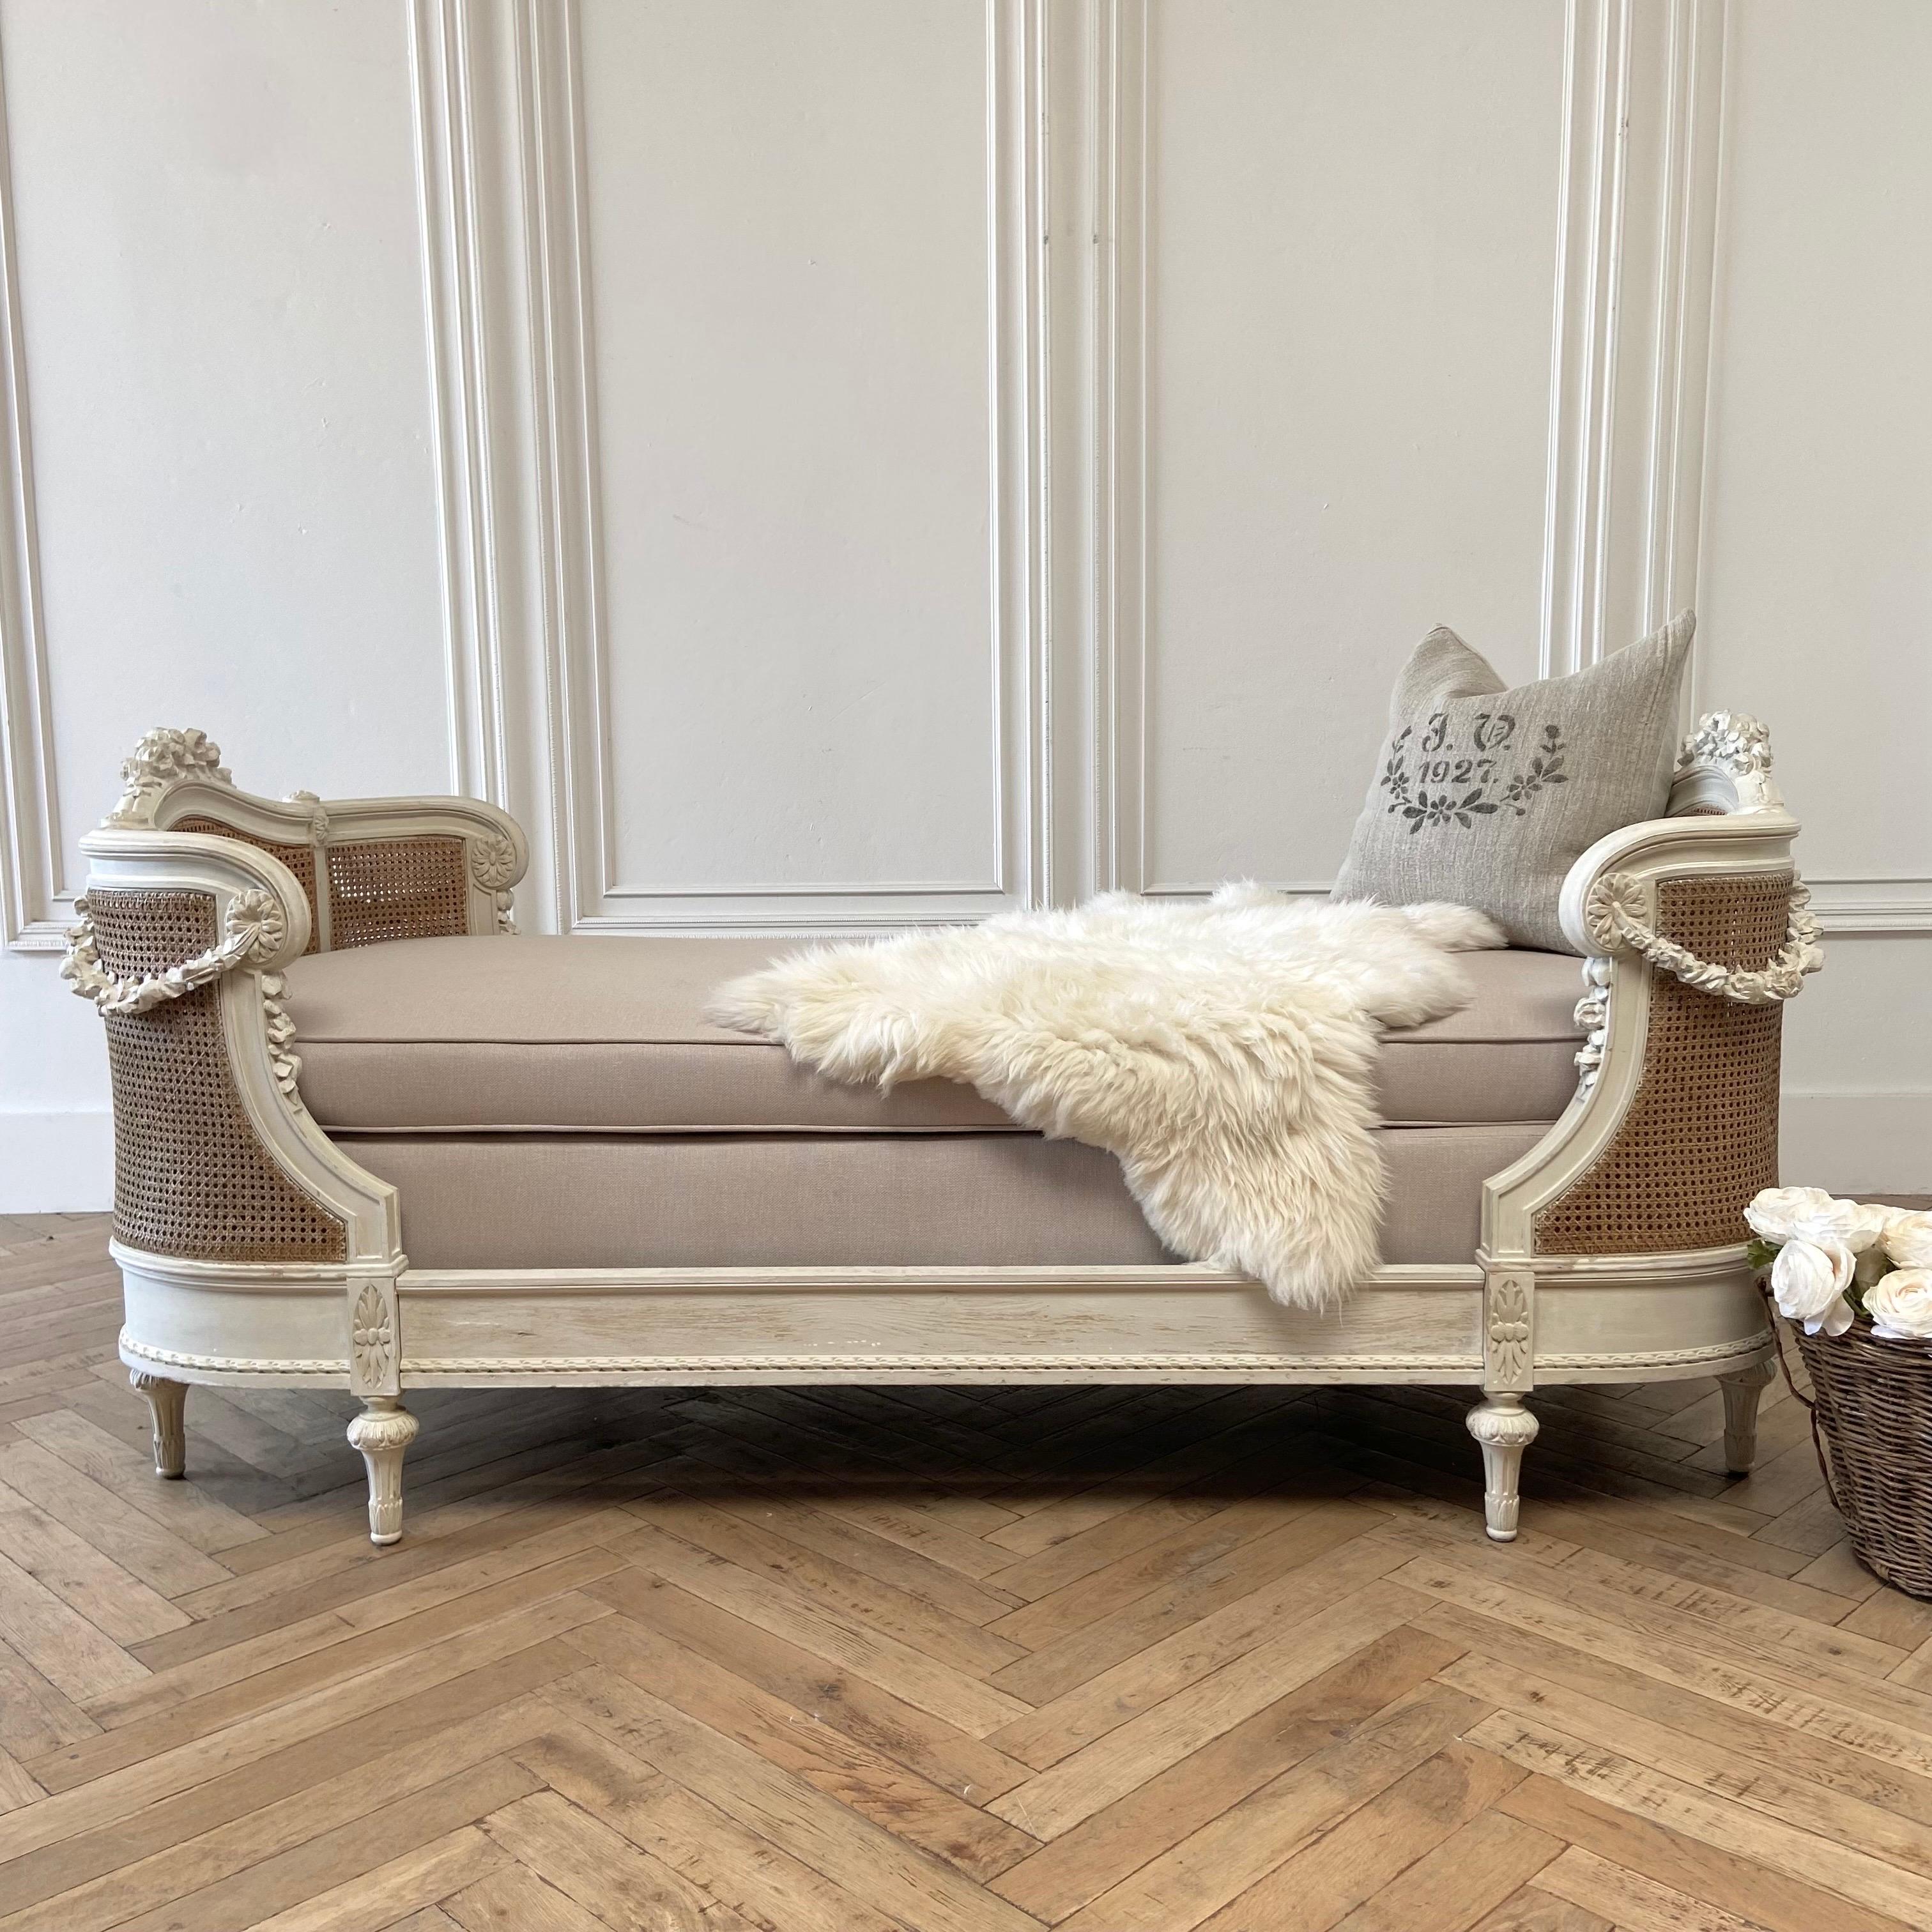 Roses and cane daybed 83”w x 40”d x 36”h
Seat: 23”h
This beautiful antique daybed has the original cane and wood carved rose swags.
Finish is original with touched up paint to some areas, it is an off white, or oyster white color.
Cane is